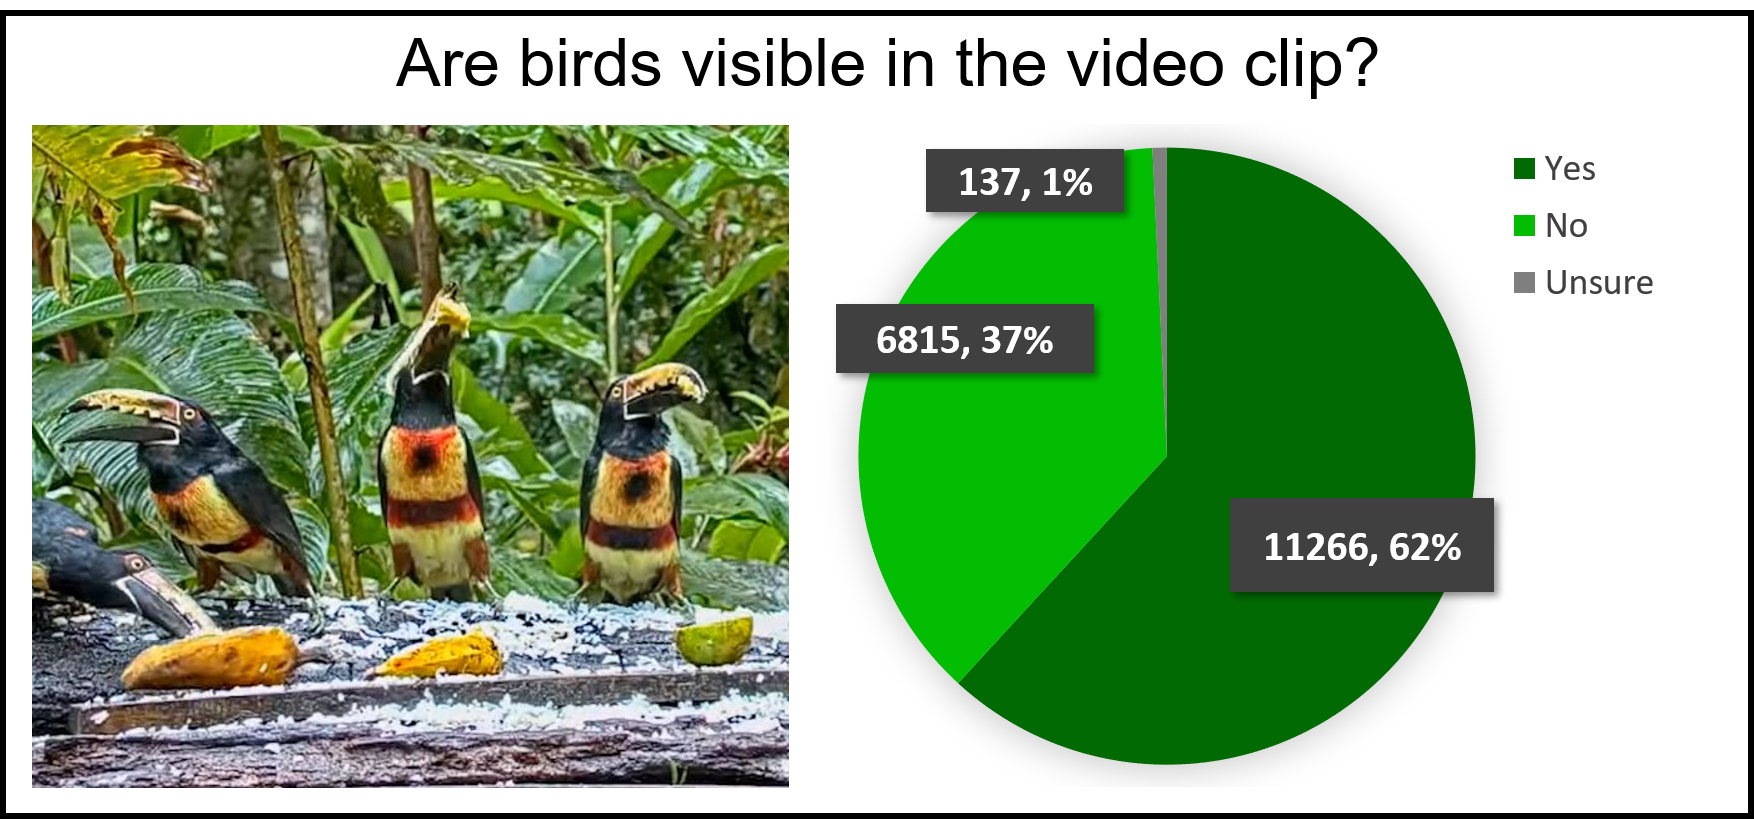 There is a photo of collared aracaris (toucans that are black, red, and yellow) eating coconut and fruit on a feeding table on the left and a pie chart on the right under a title that reads, "Are birds visible in the video clip?" 137 (1%) clips were unsure, 6,815 (37%) clips are no, and 11,266 clips are yes.